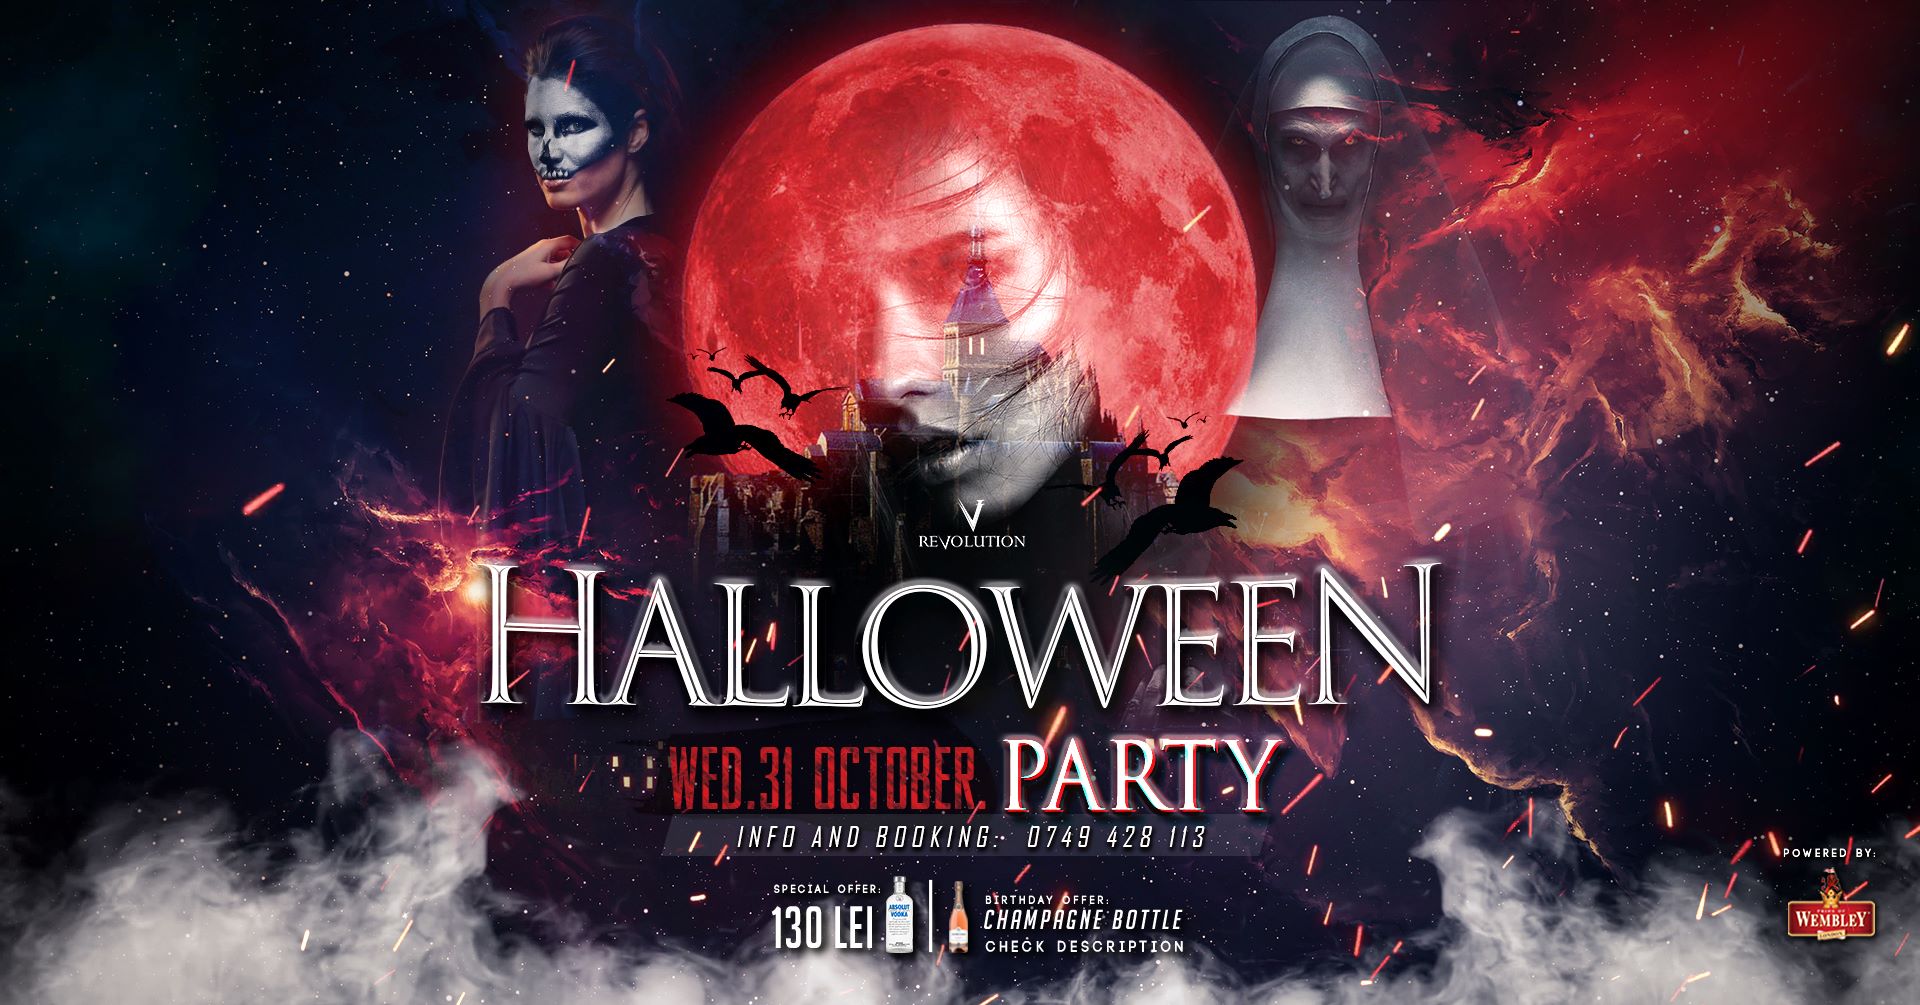 The Night With The Halloween Party Revolution Club Evenimente Din Cluj Napoca